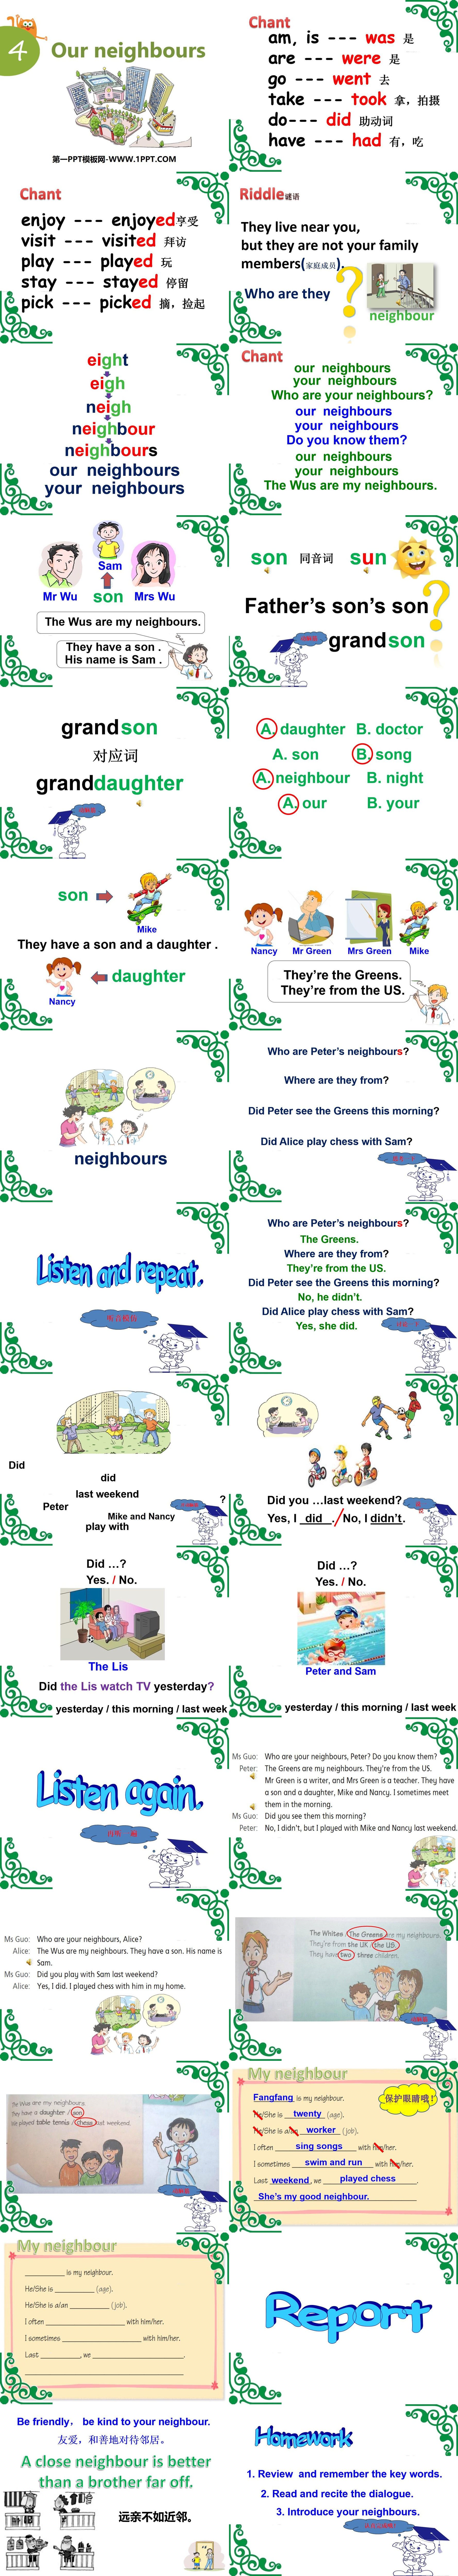 《Our neighbours》PPT
（2）